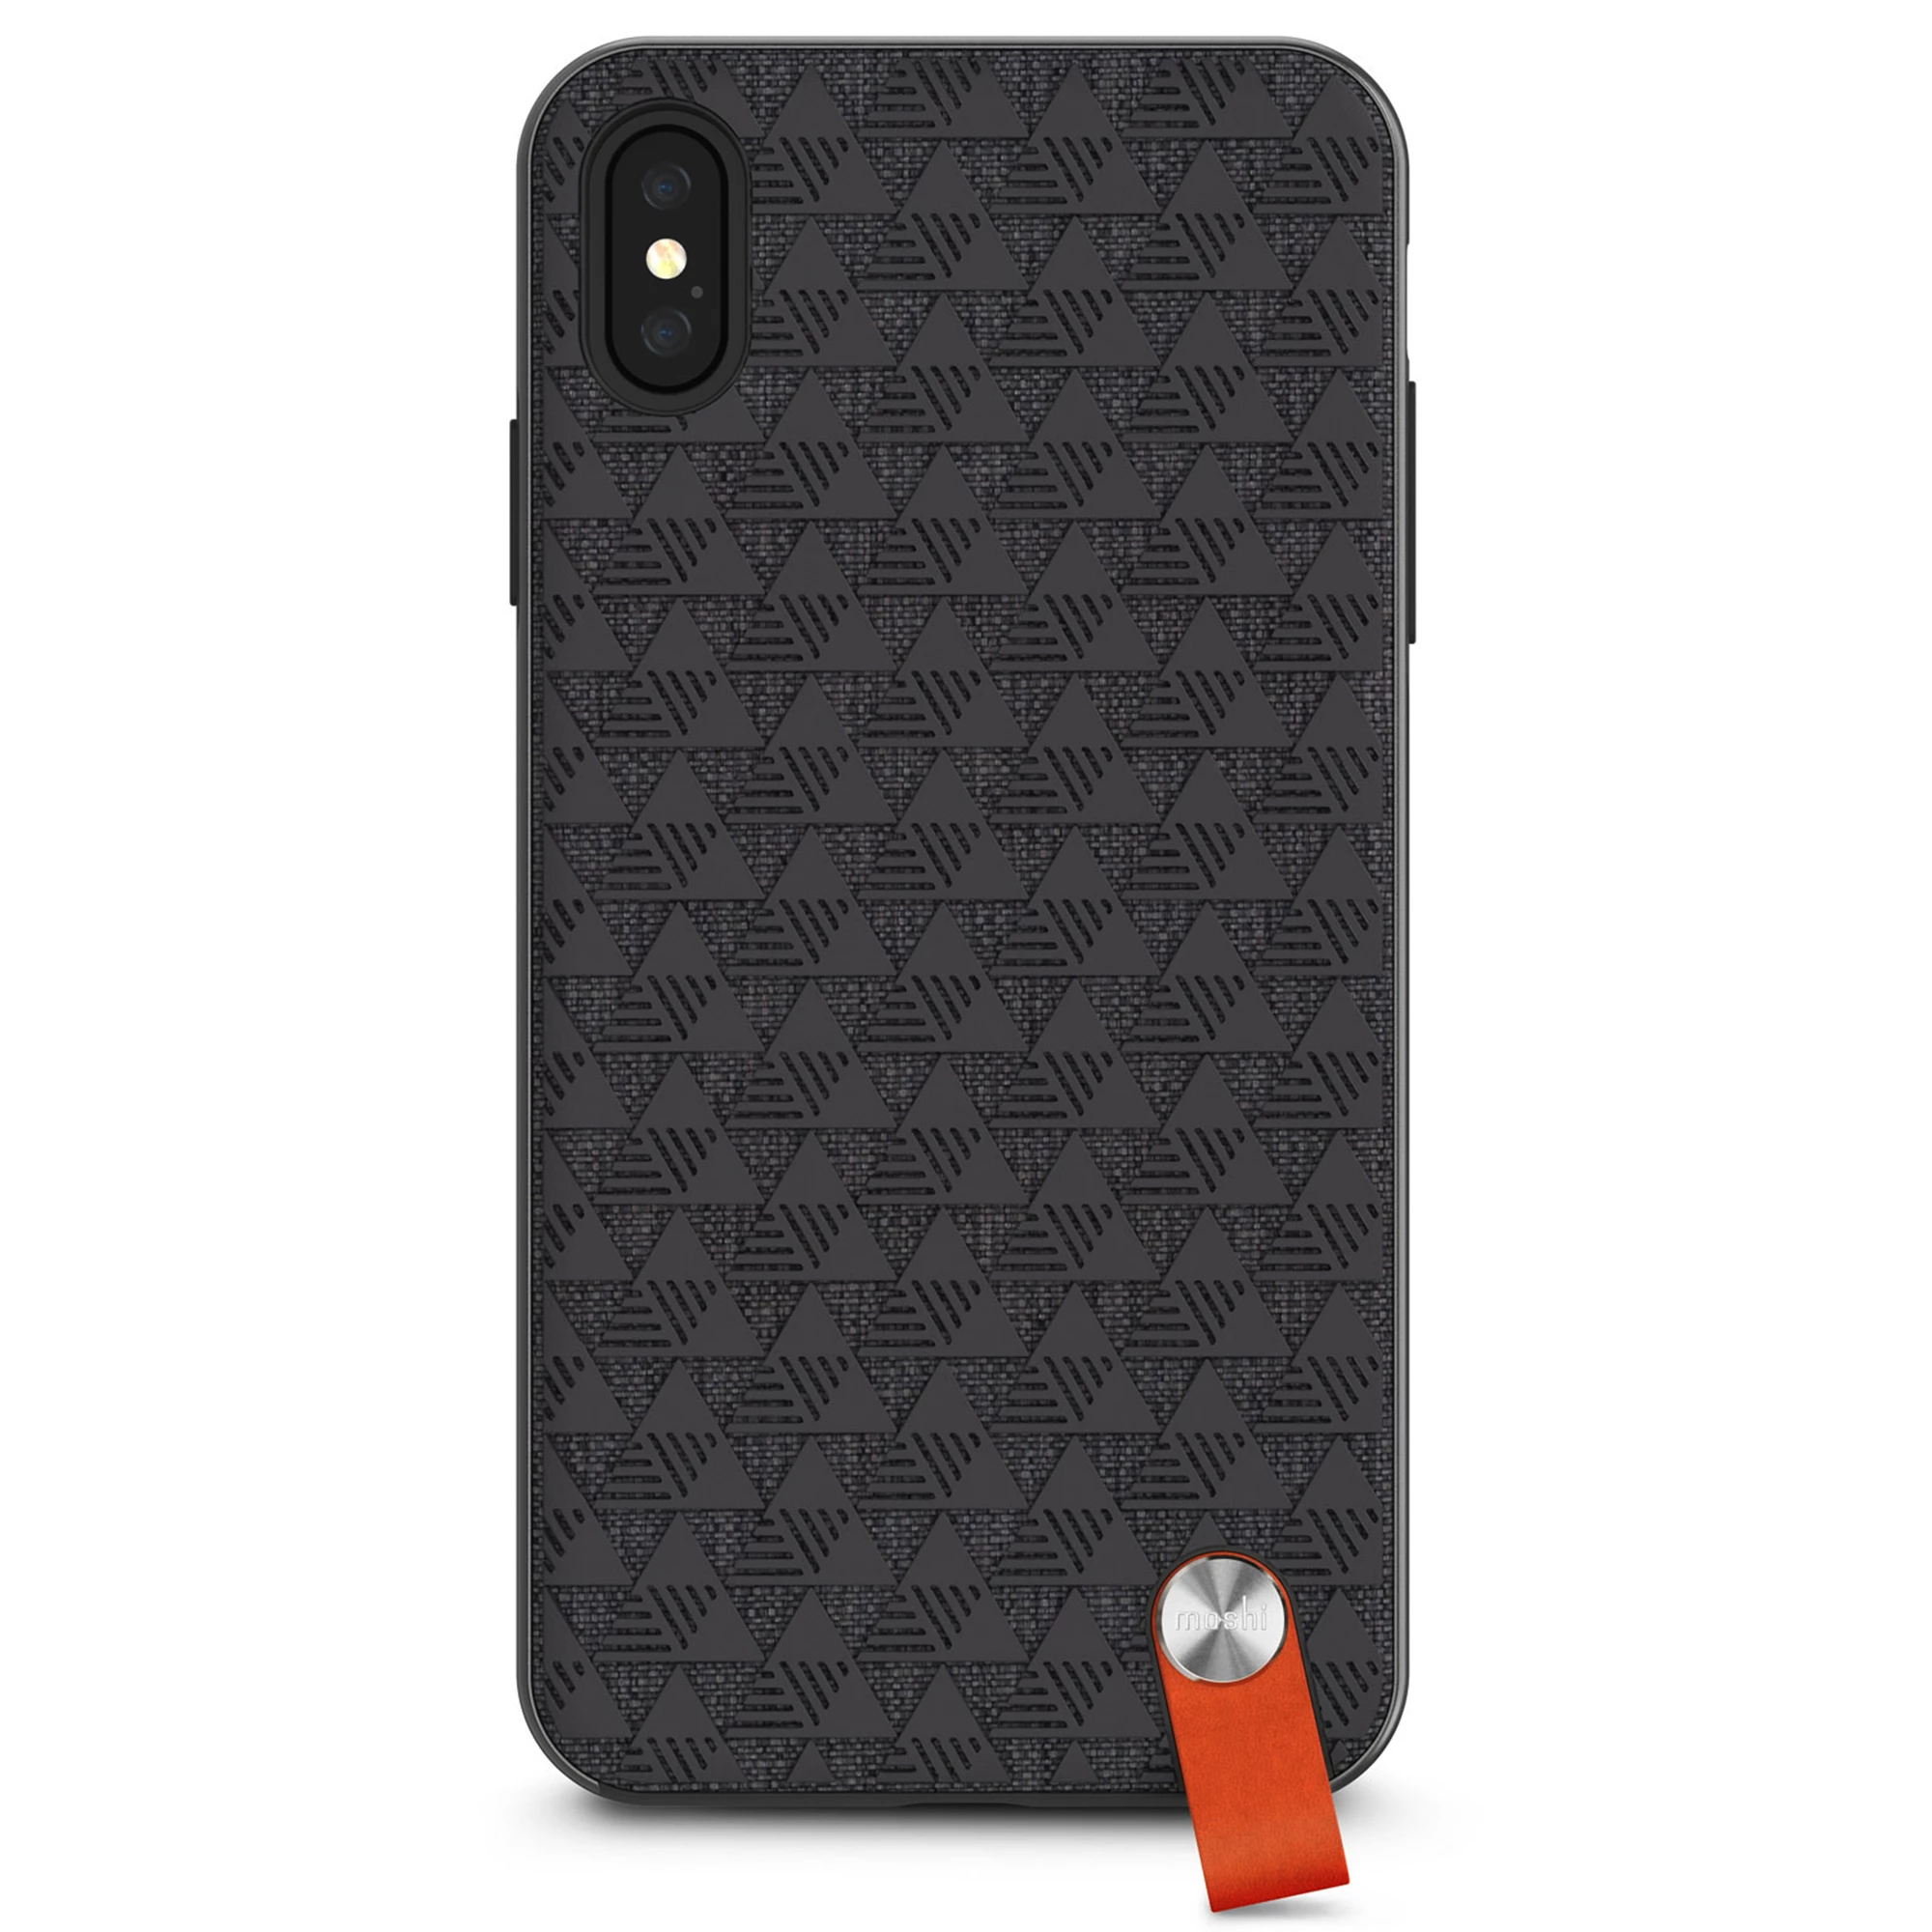 Moshi Altra Slim Hardshell Case With Strap Shadow Black for iPhone XS Max (99MO117002)